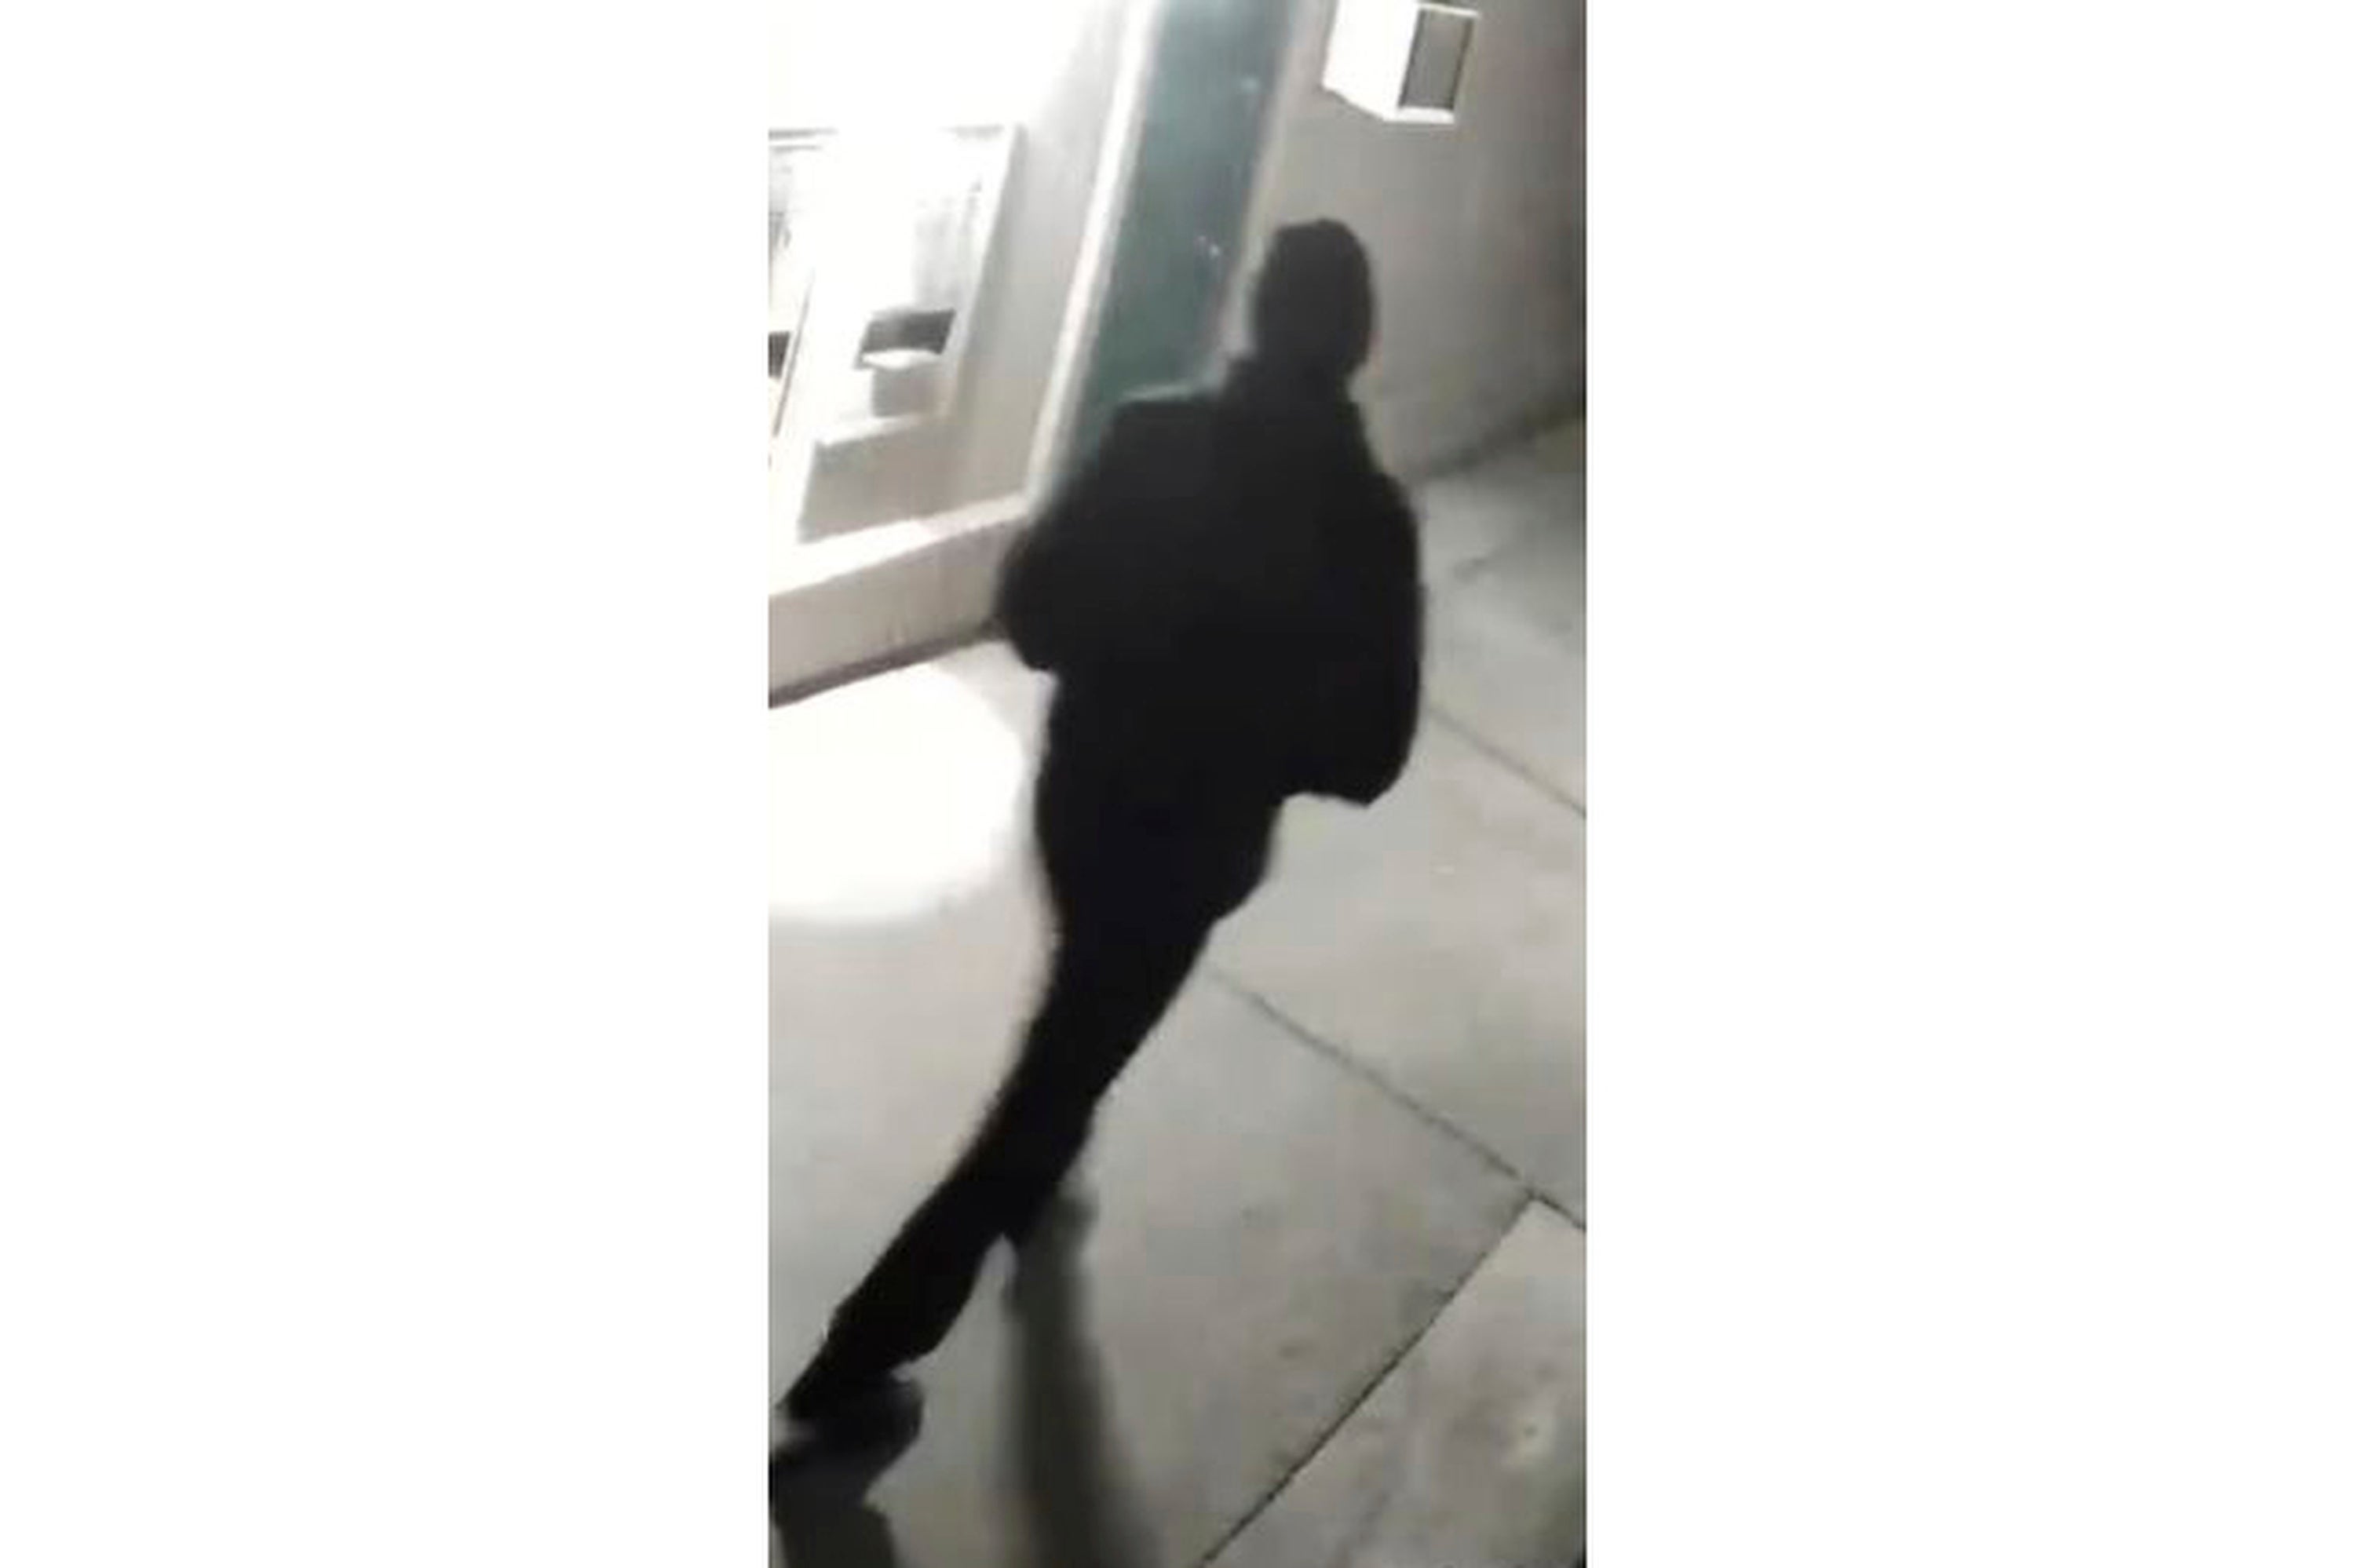 A dark-clad figure was caught on camera near the scenes of several of the shootings